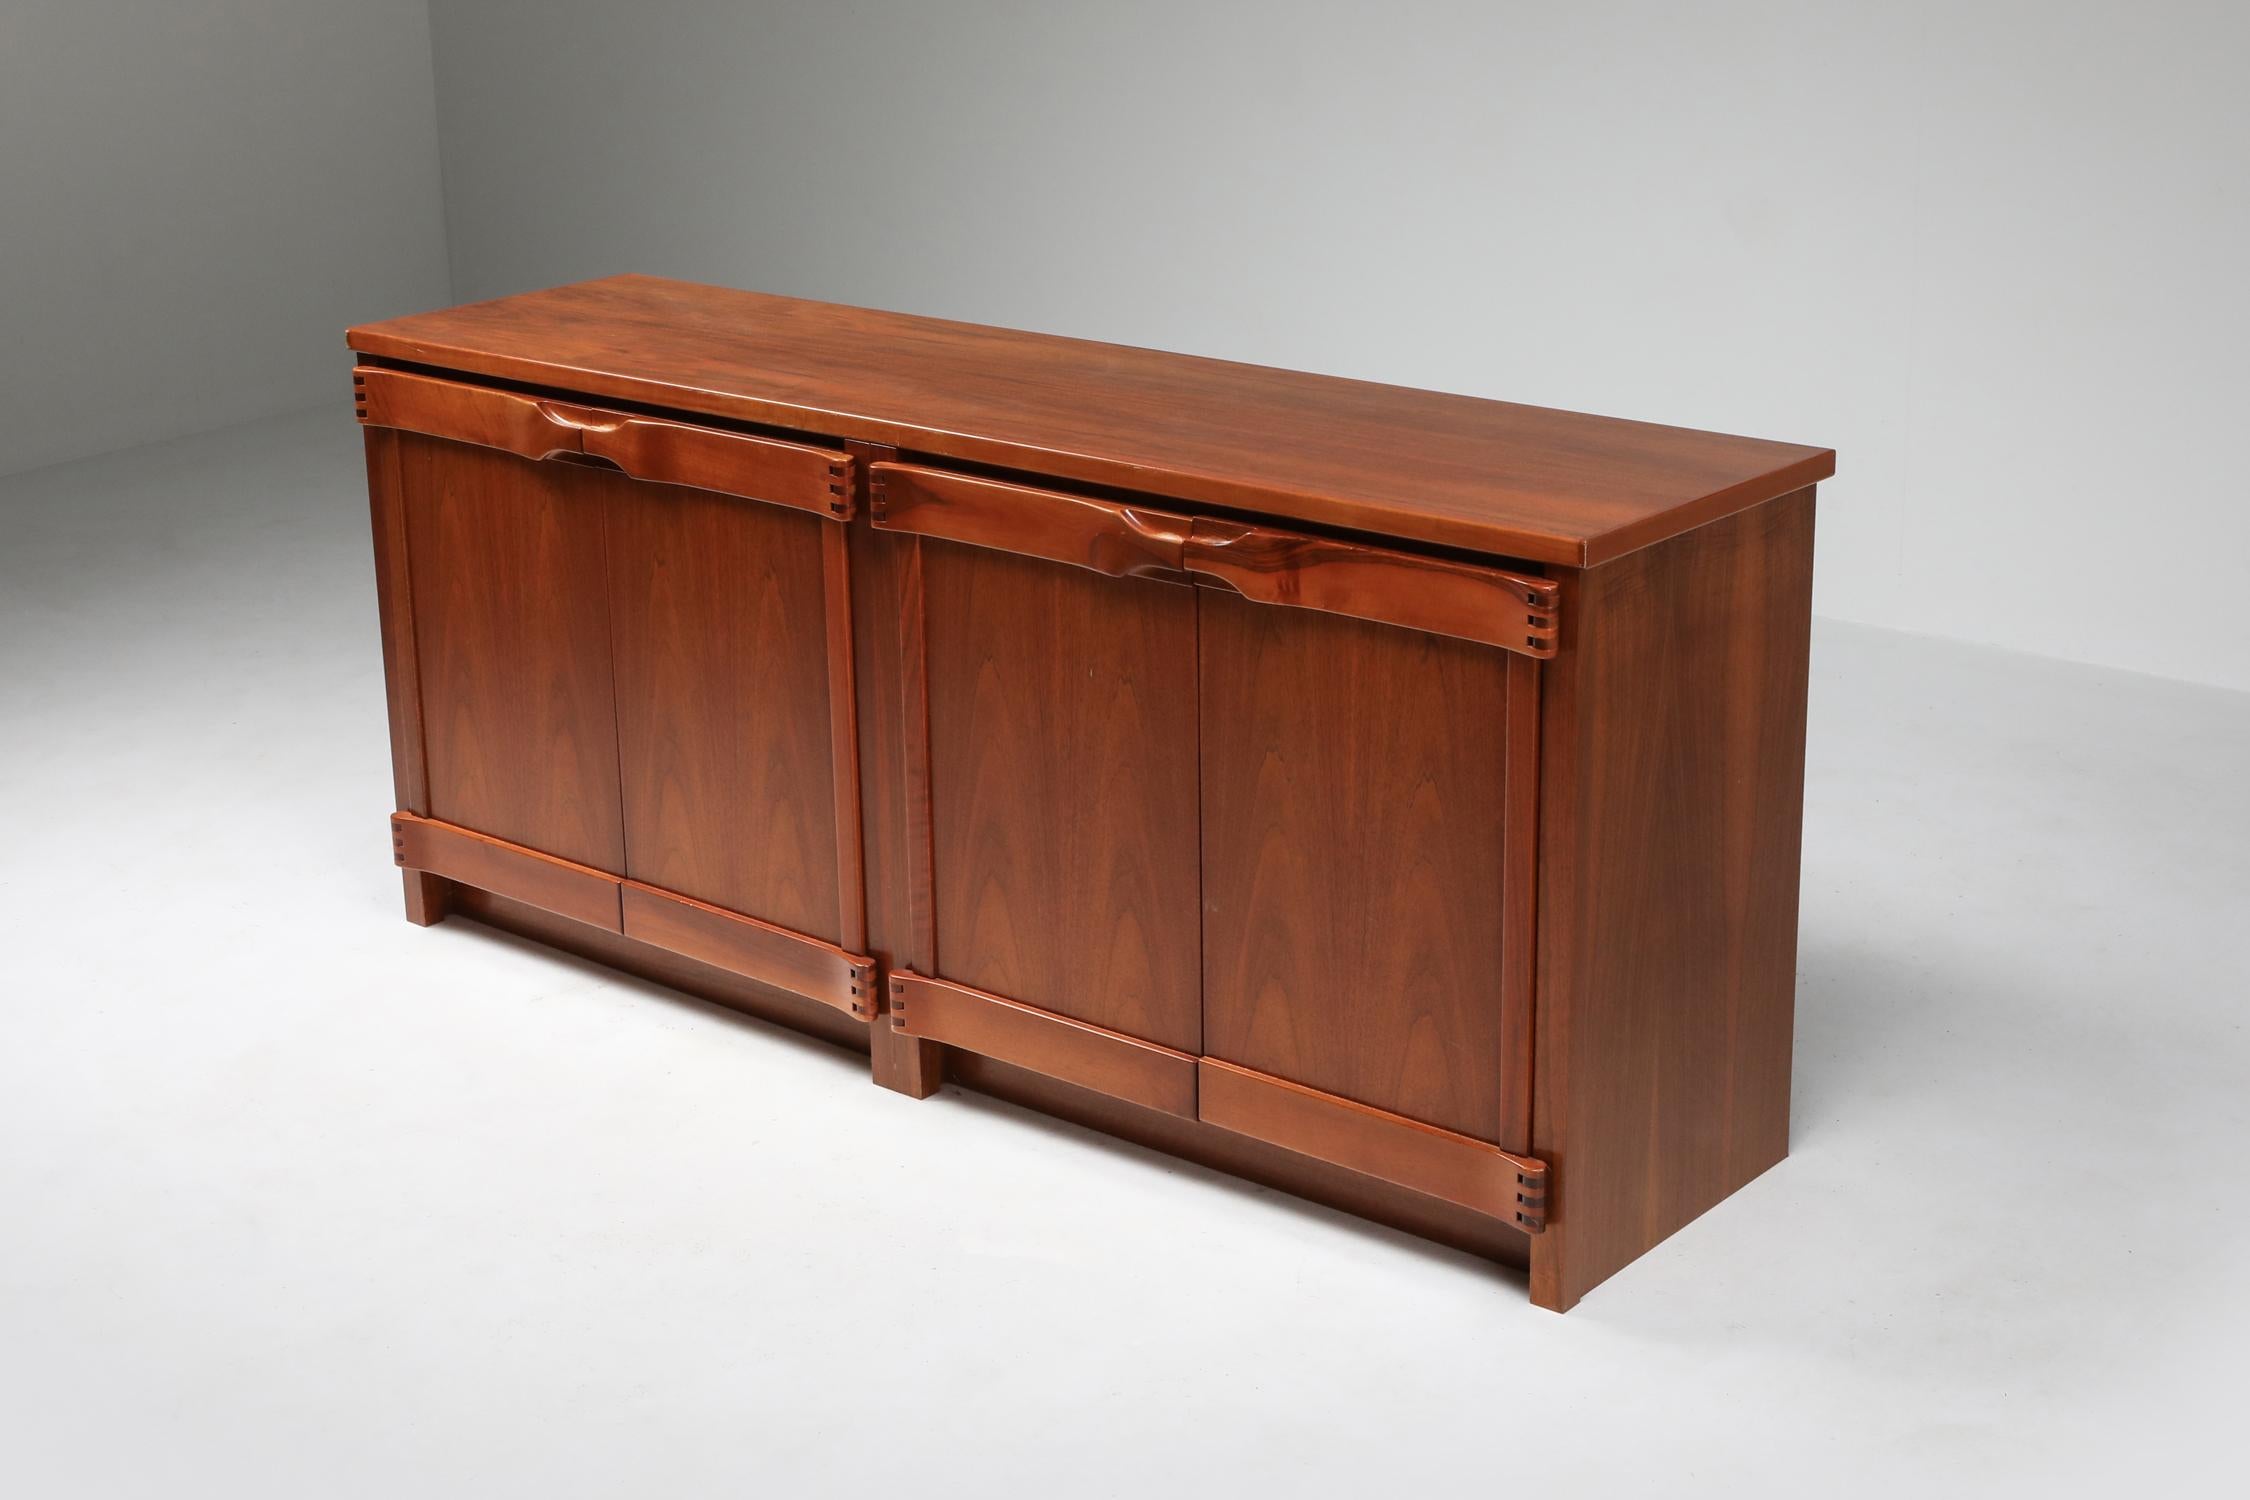 Chapo style sideboard in walnut by Franz Xaver Sproll, 1960s.
Fantastic use of hinges and connections just as Pierre Chapo did in the same era.
Gorgeous high end midcentury to Postmodern pieces.
  